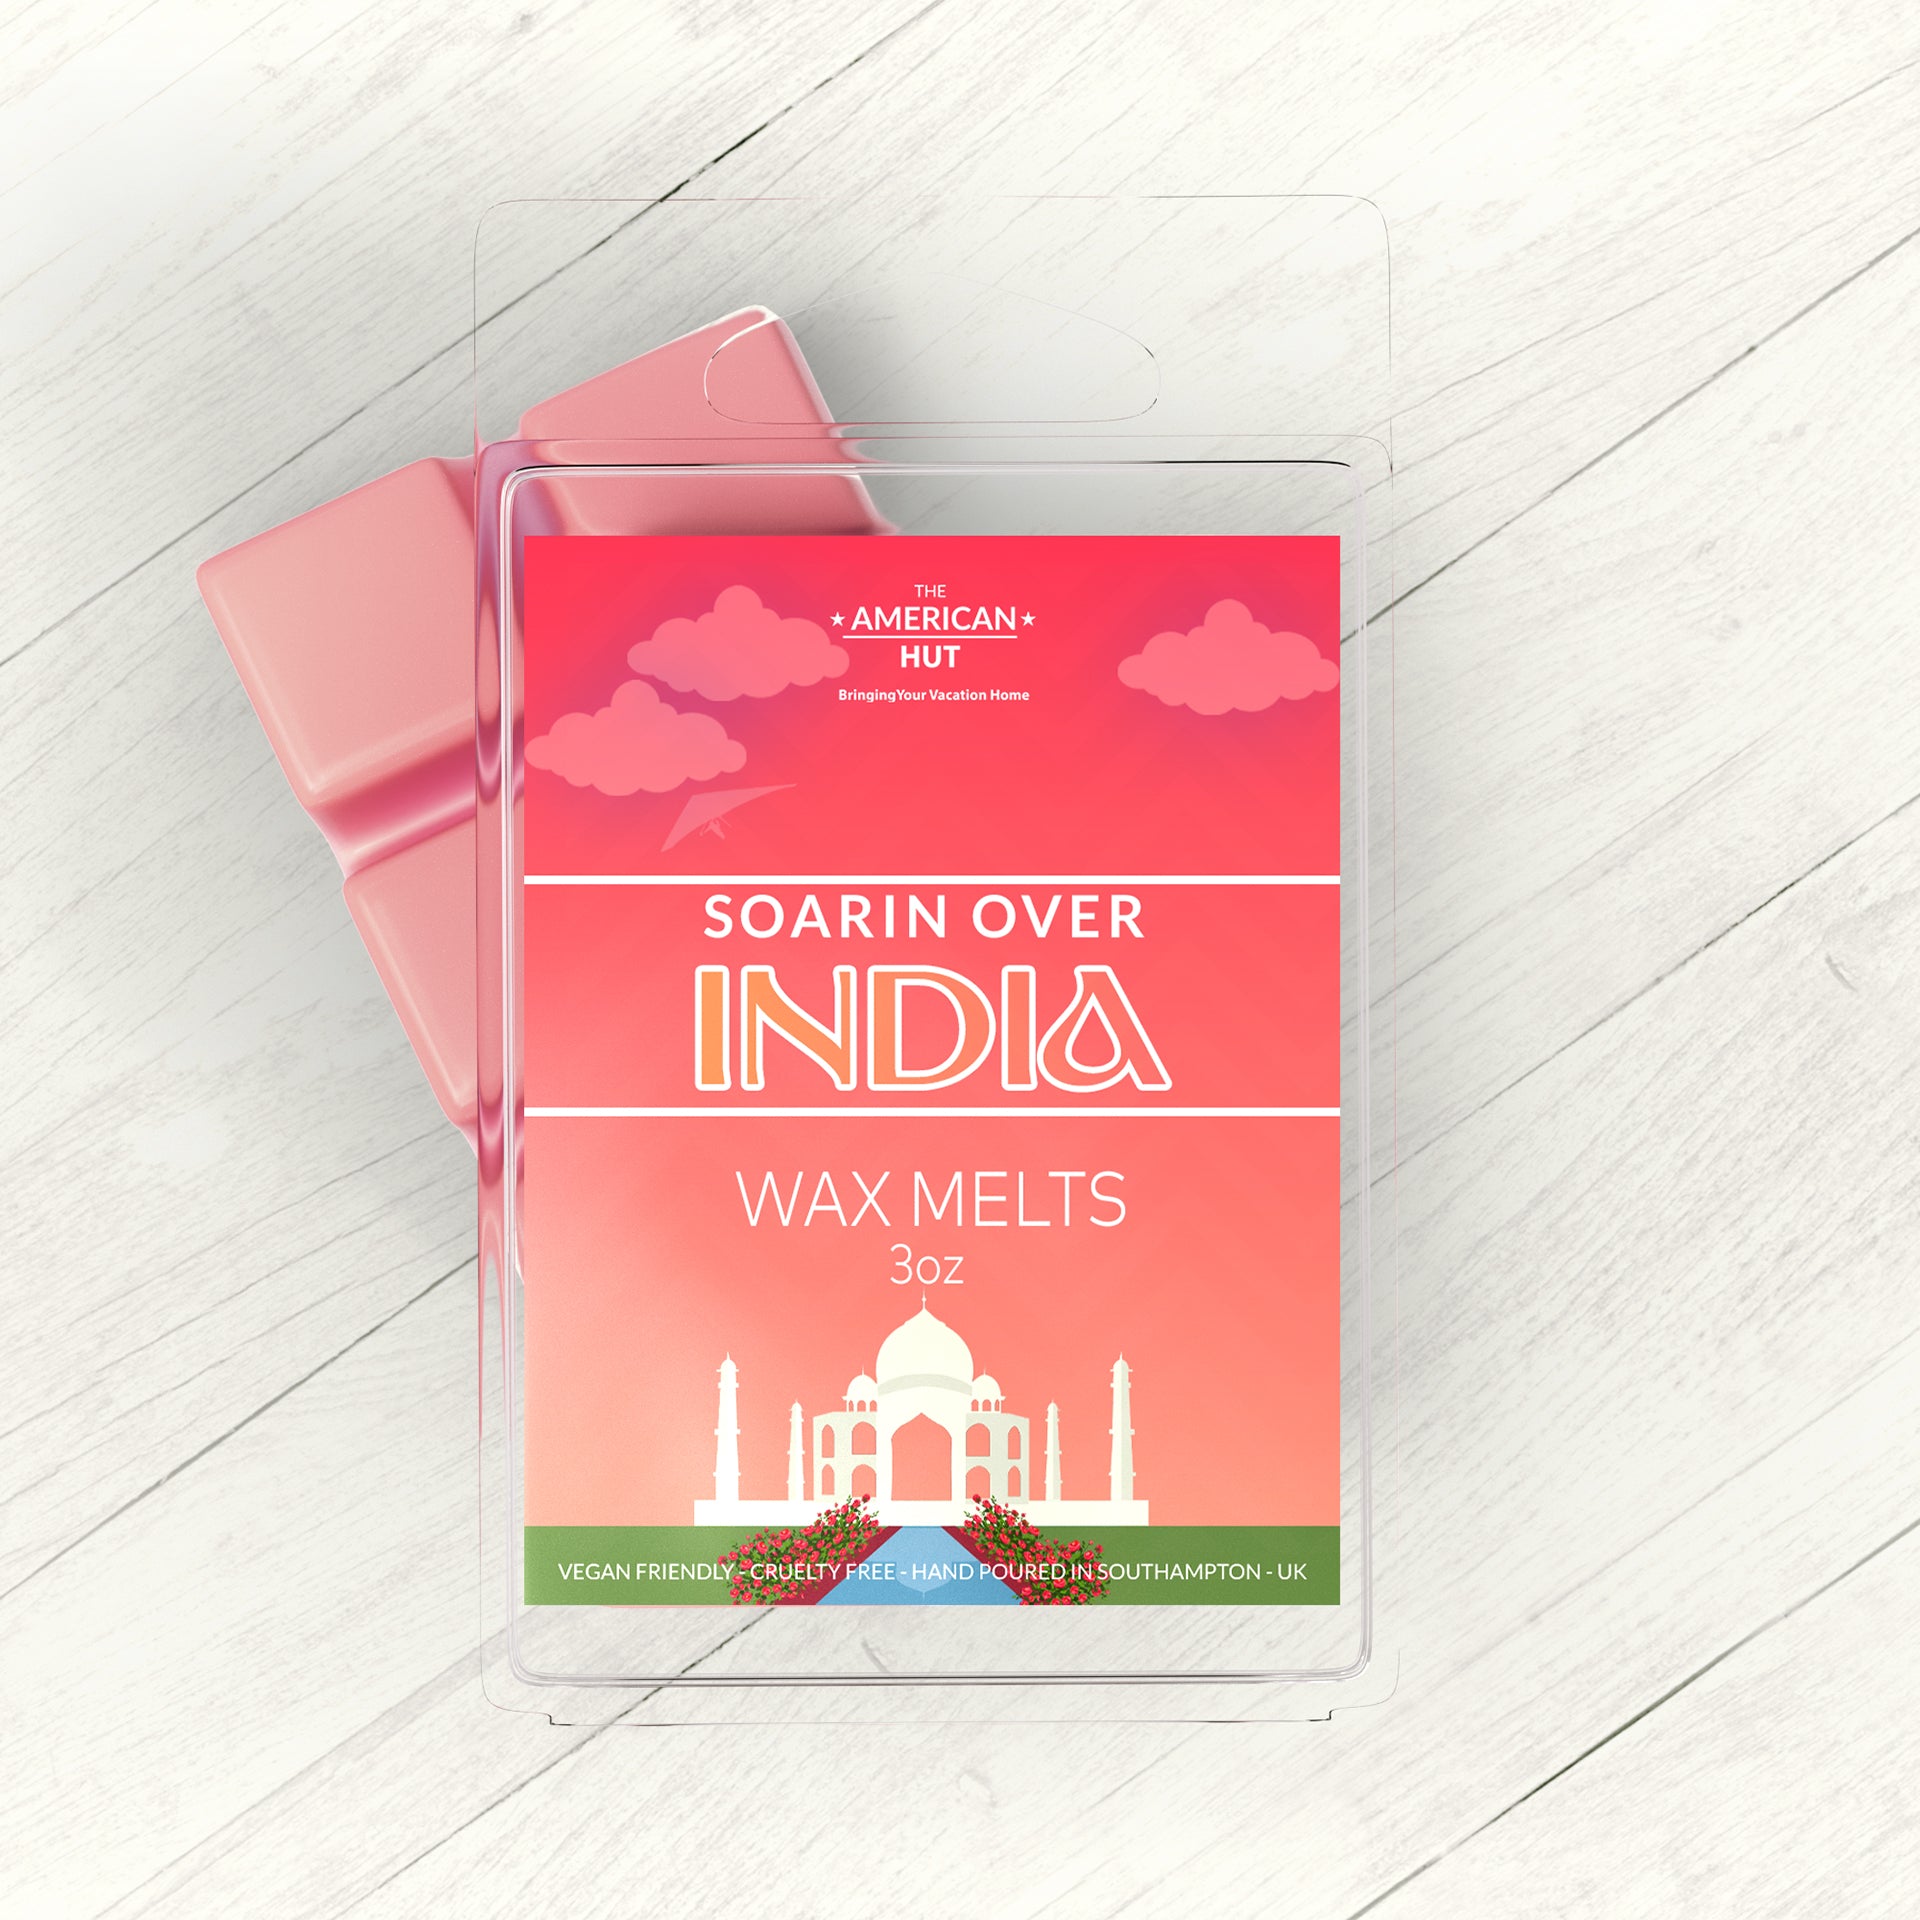 Soarin Over India Wax Melt On wooden background